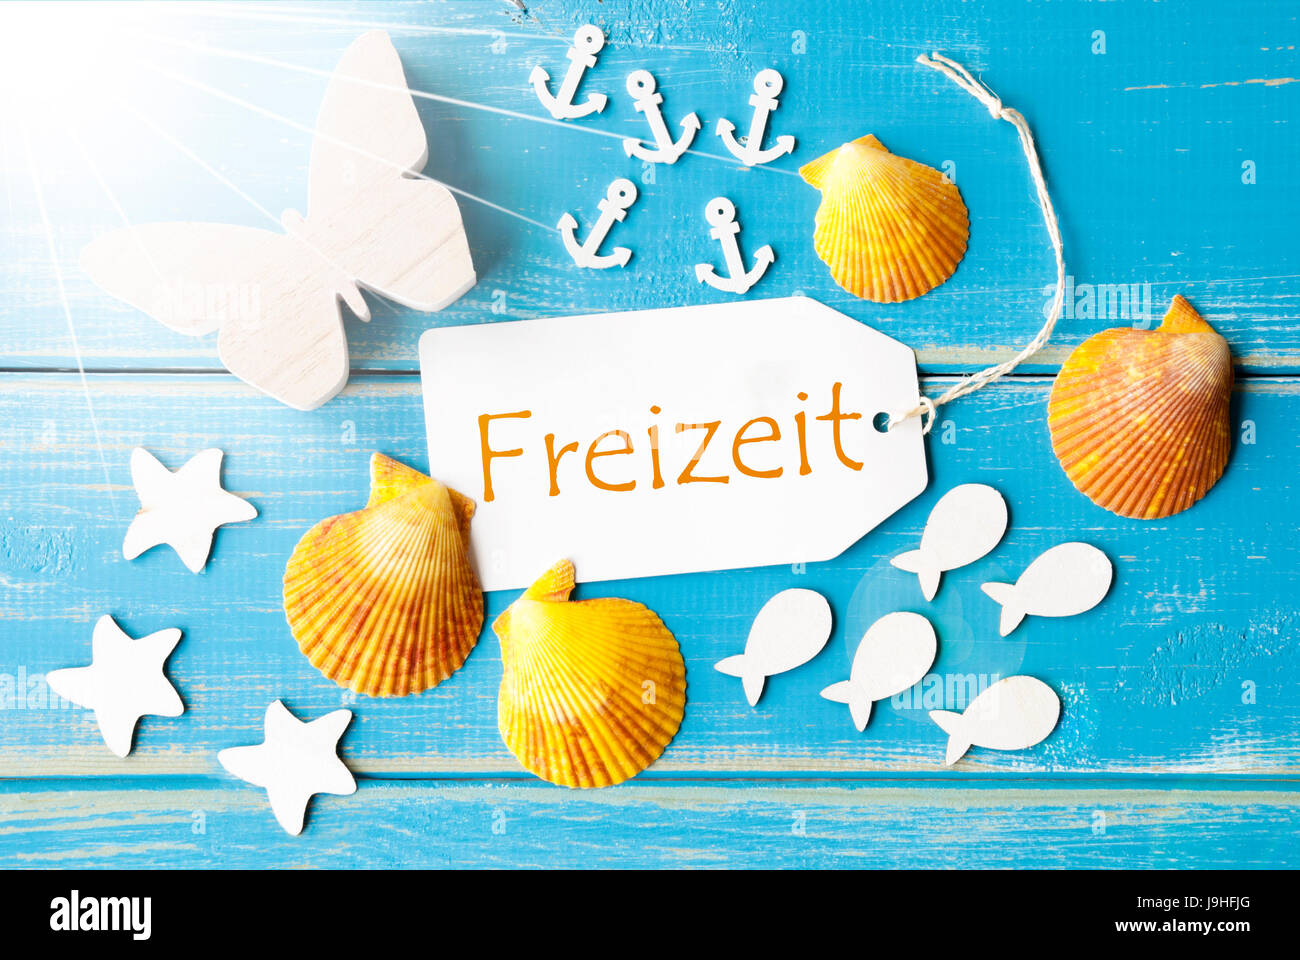 Sunny Summer Greeting Card With Freizeit Means Leisure Time Stock Photo